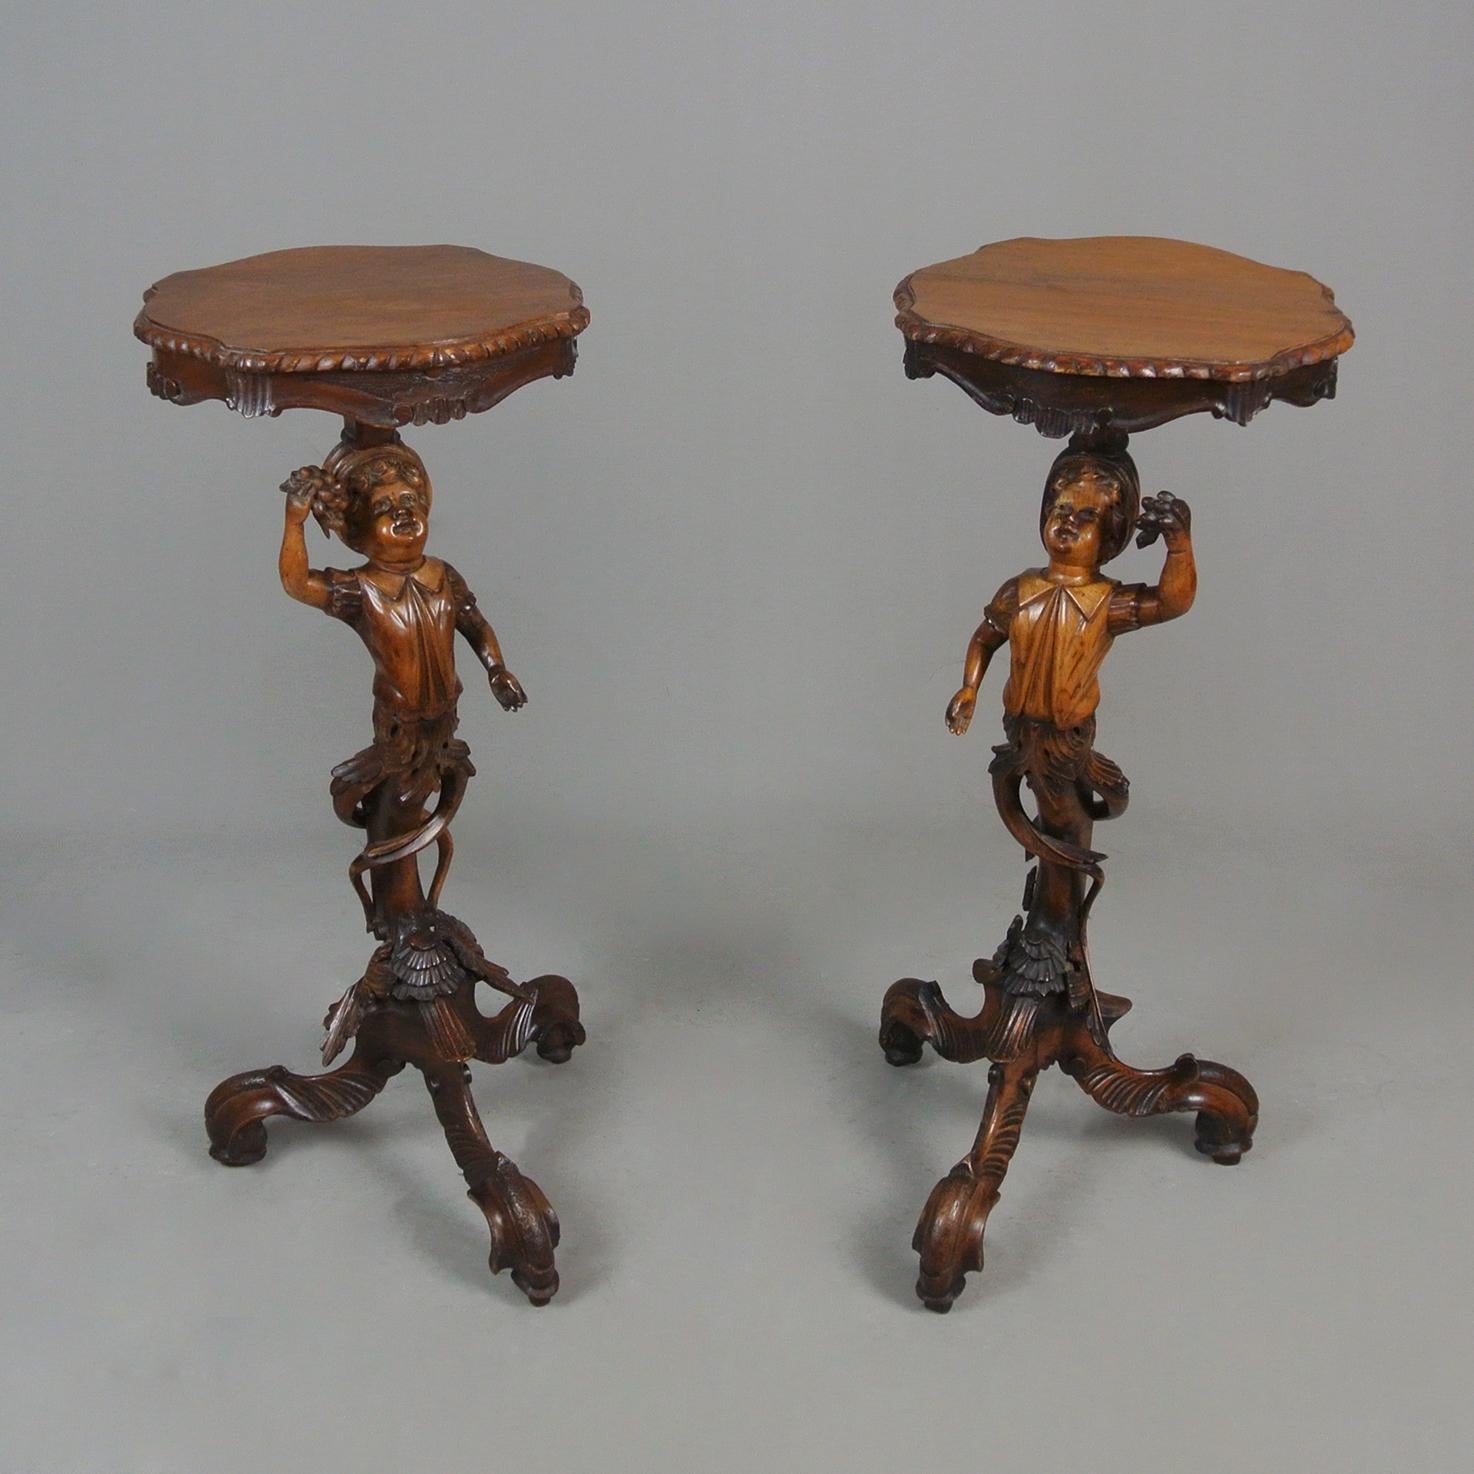 A wonderful and rare pair of mid 19th century solid walnut Black Forest torcheres, each column formed as a well carved boy, carrying a bunch of grapes in one hand and wearing a smock shirt and cap.  Their bodies transform into a tree trunk wrapped